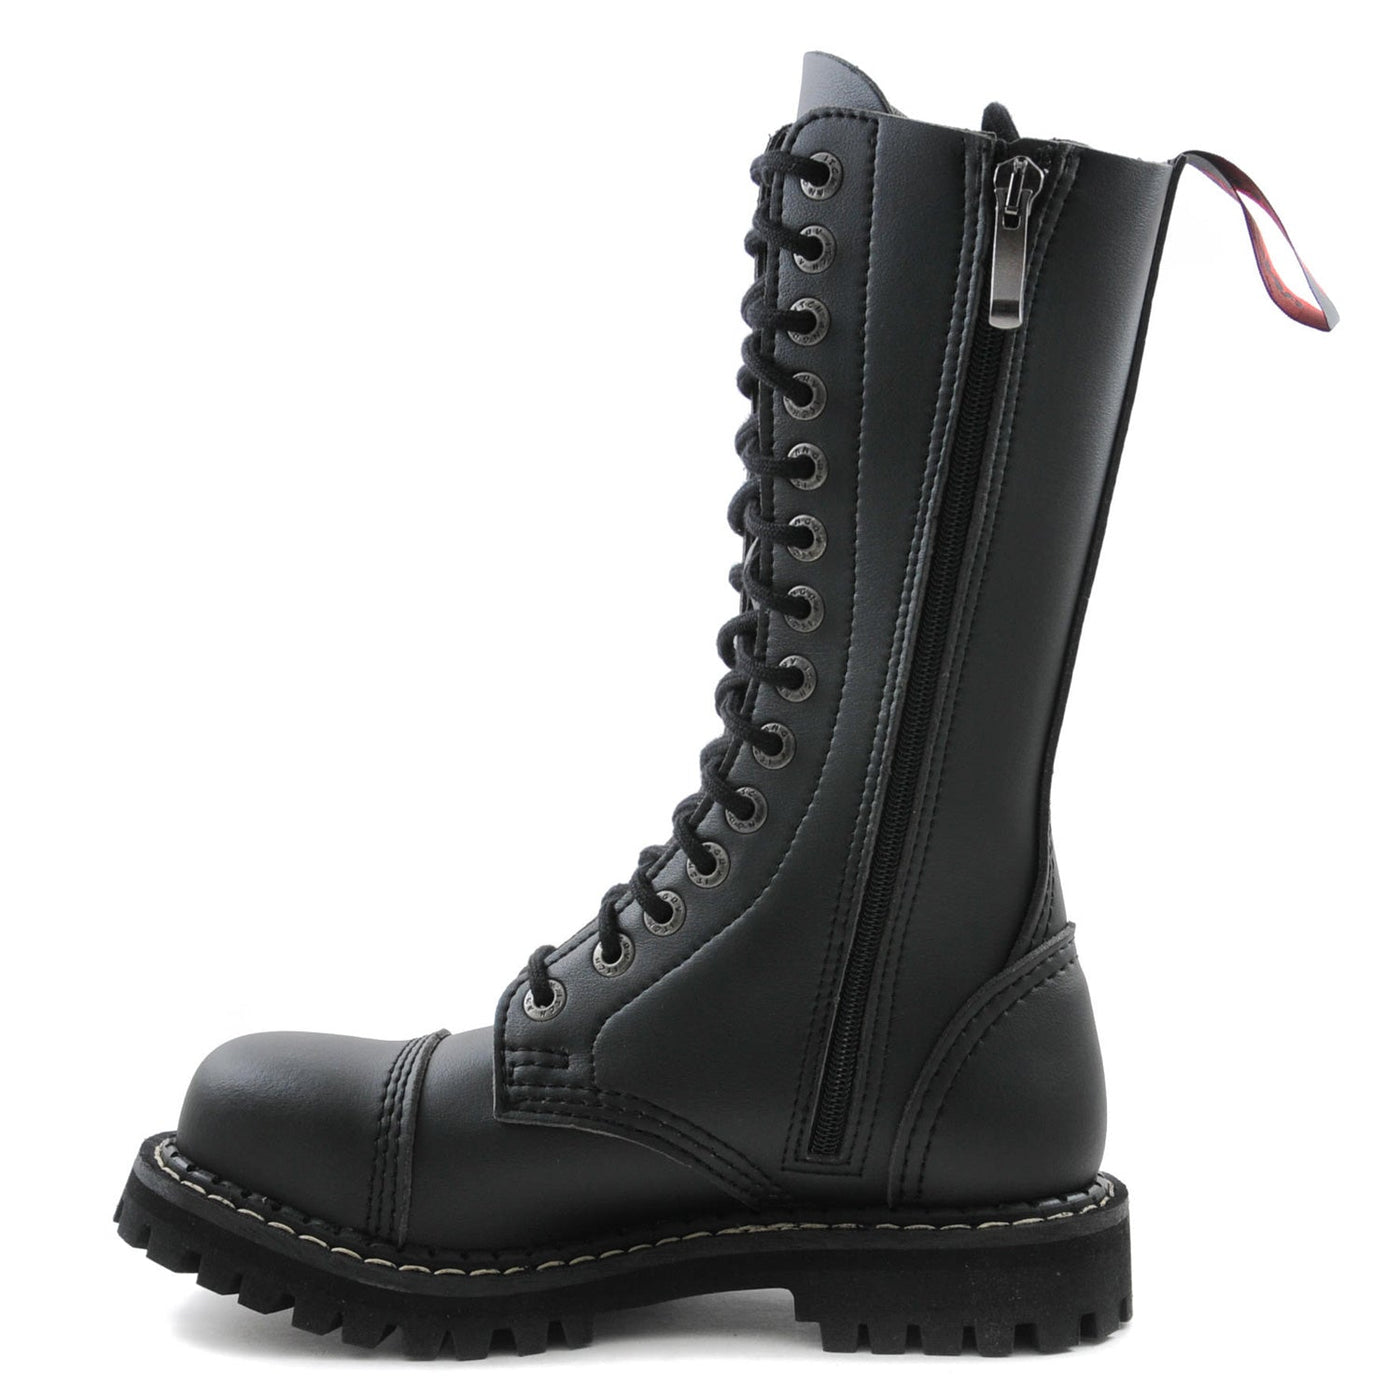 Angry Itch 14 Hole Boots with Steel Toe Cap Black PU Vegan Leather